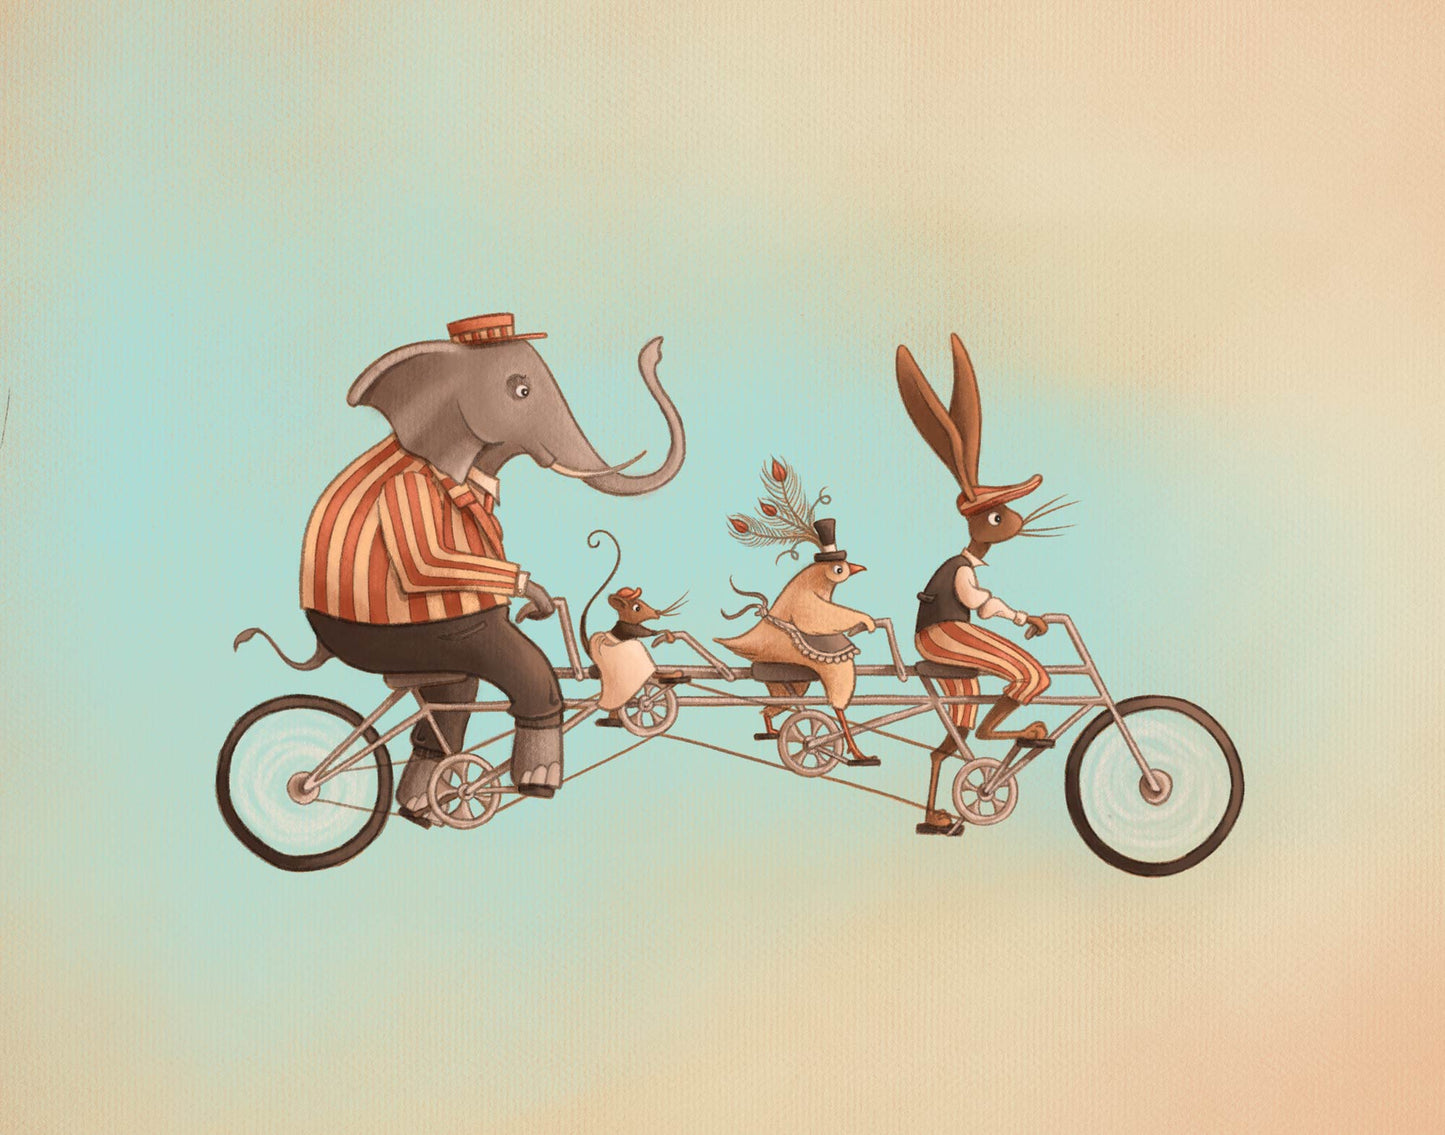 Tandem Print - Full Image with an elephant, a mouse, a chicken, and a rabbit wearing old fashioned clothing and riding a tandem bicycle.